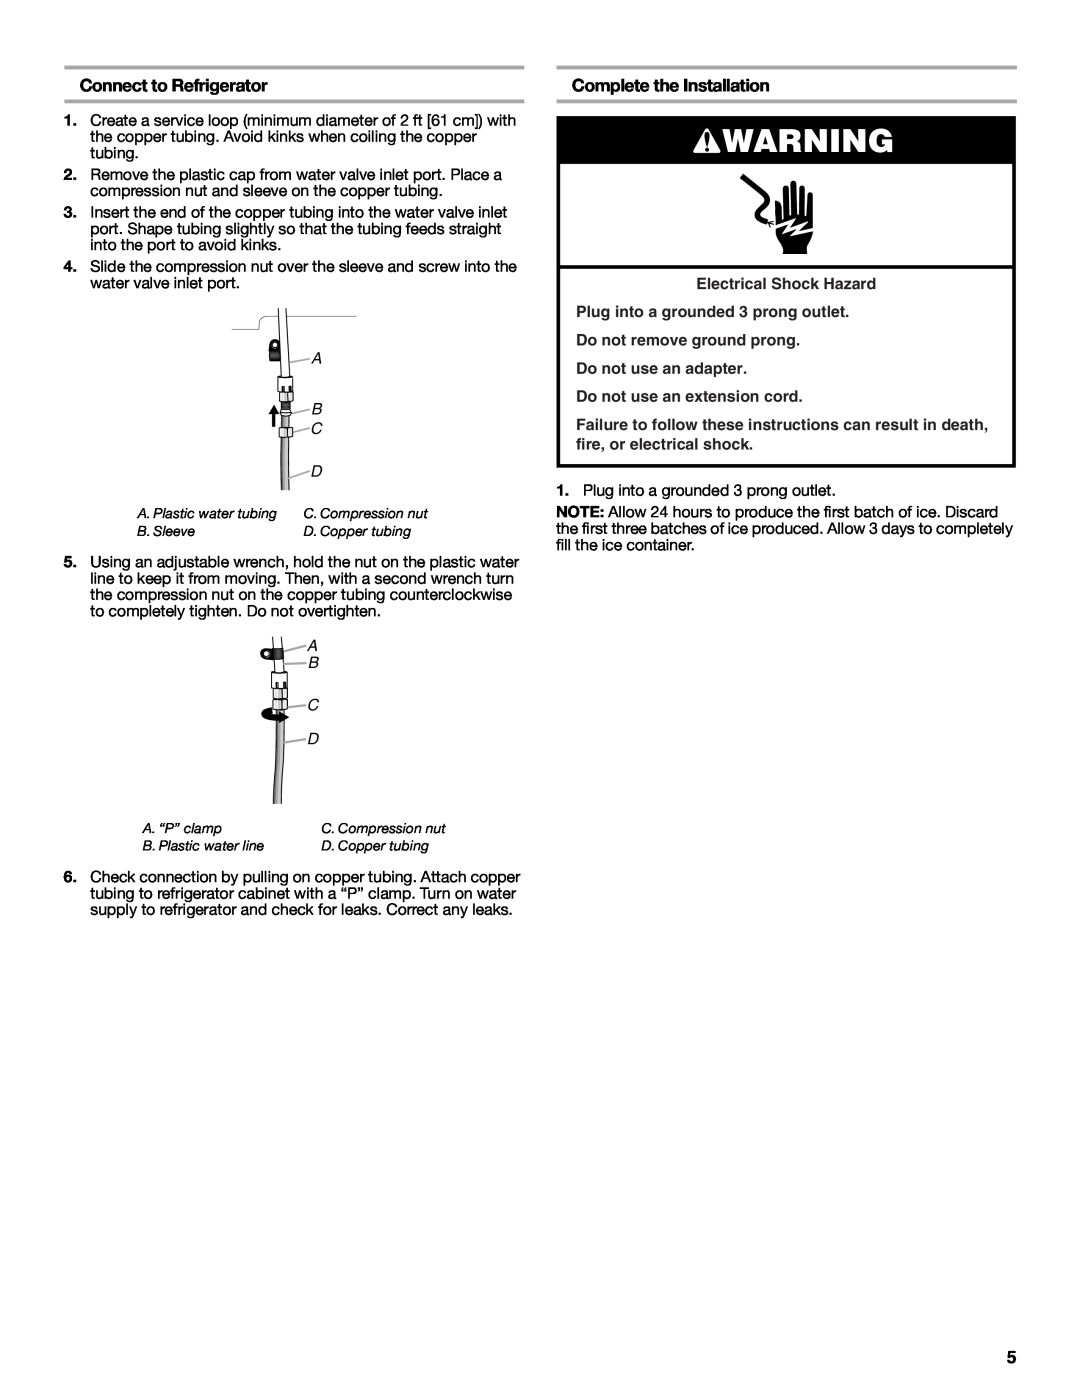 Jenn-Air W10329370A Connect to Refrigerator, Complete the Installation, A B C D, Electrical Shock Hazard 